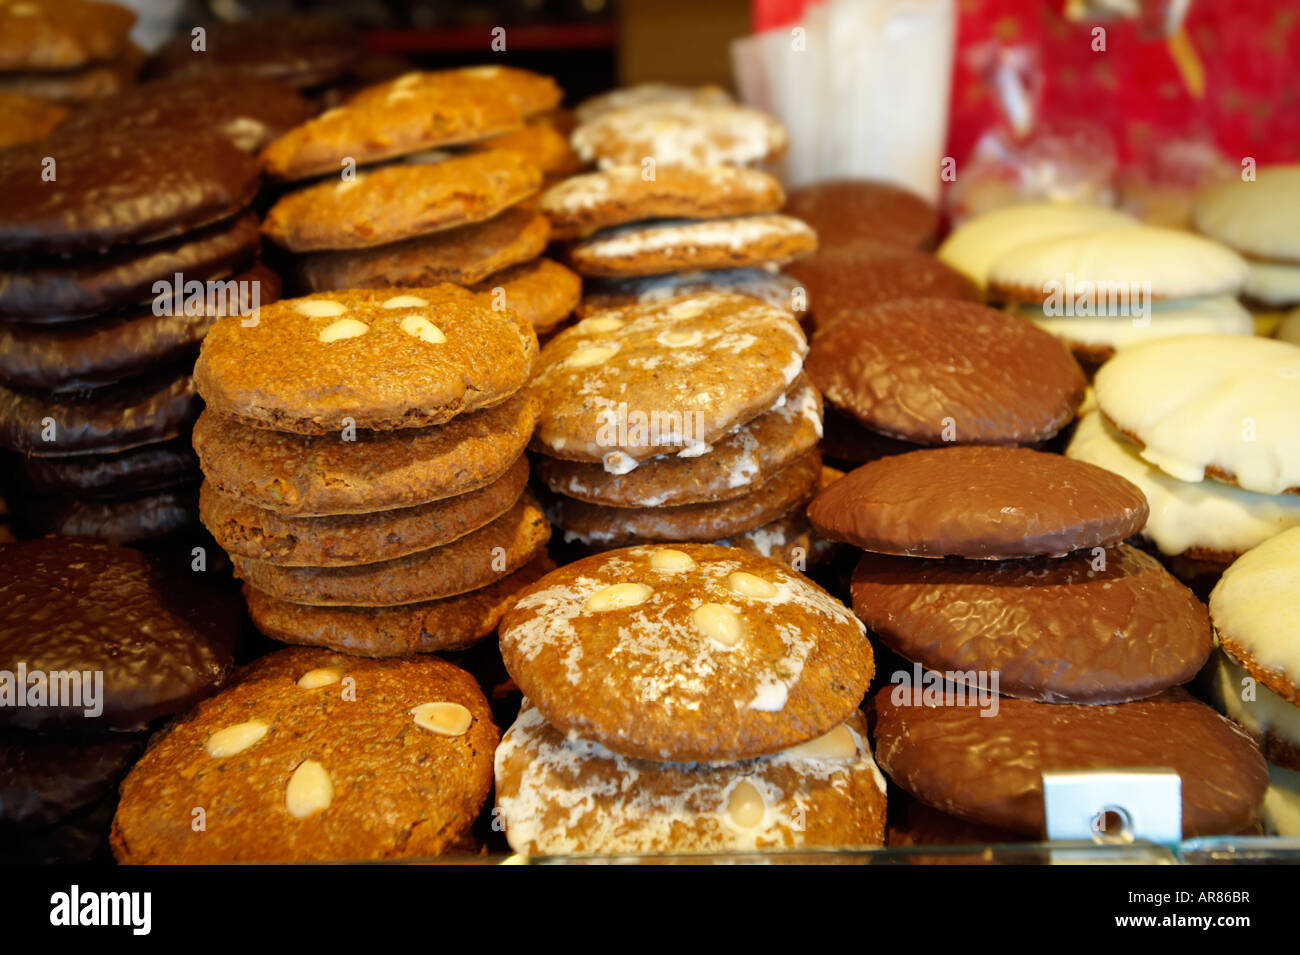 Festive biscuit stall. Christmas market, Nuremberg, Germany Stock Photo